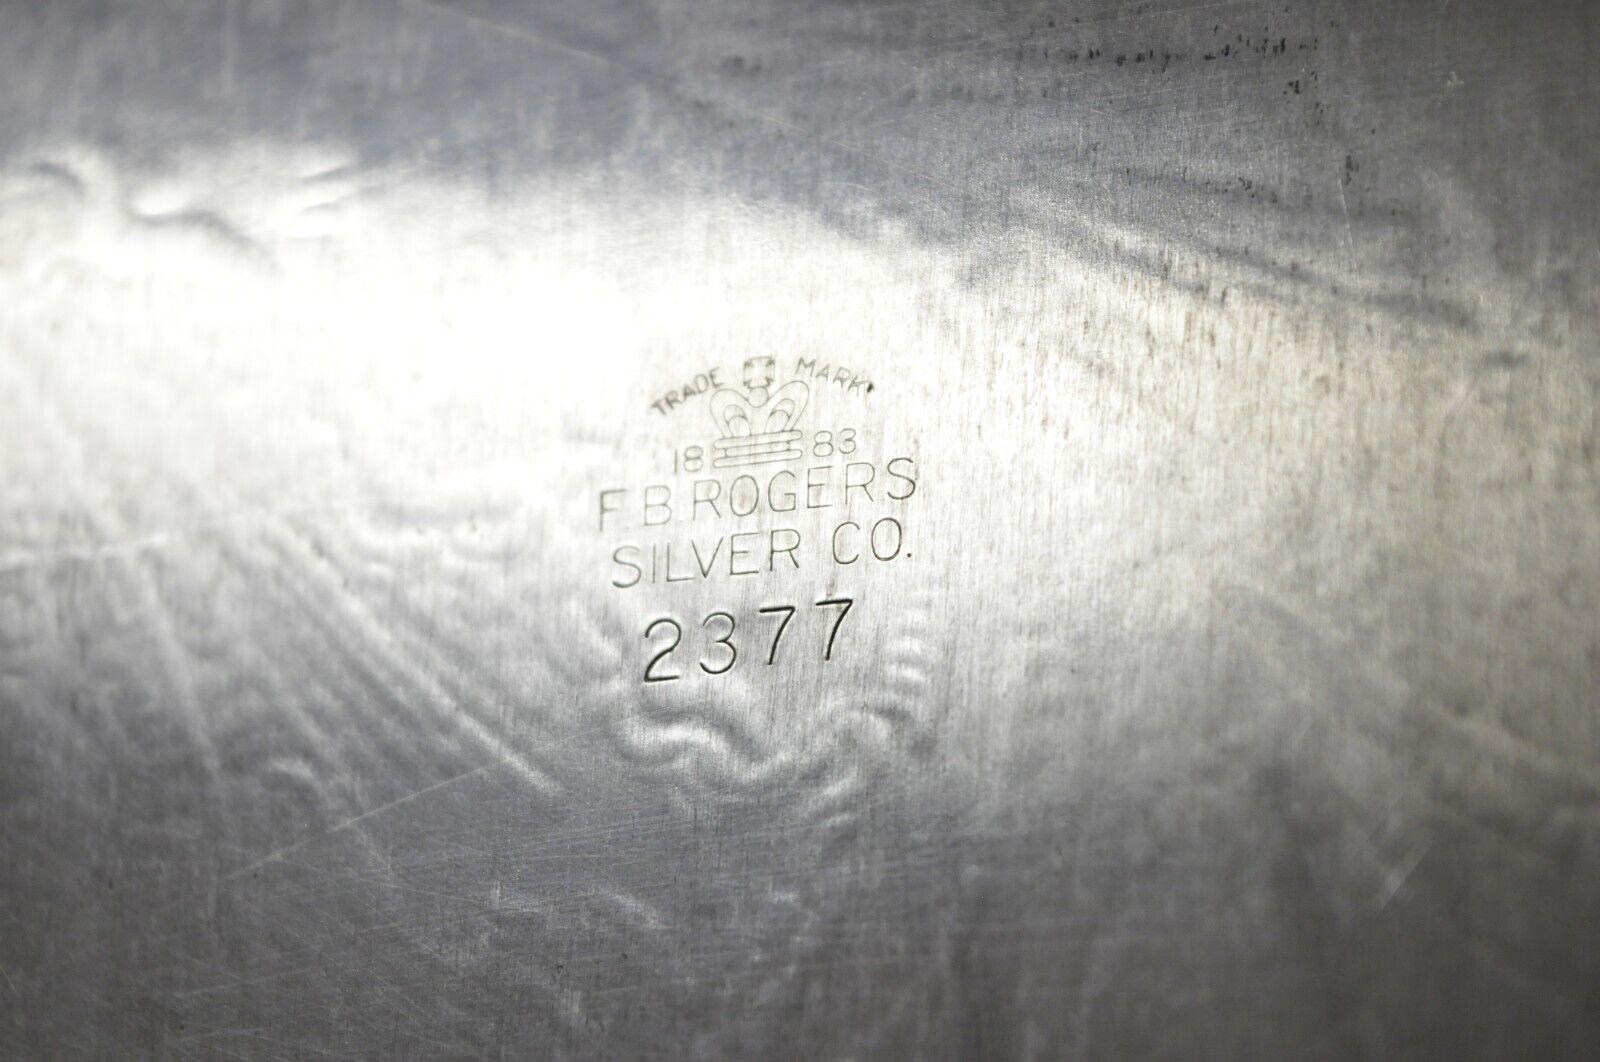 20th Century Vintage FB Rogers Silver Co 2377 Silver Plated Serving Platter Tray For Sale